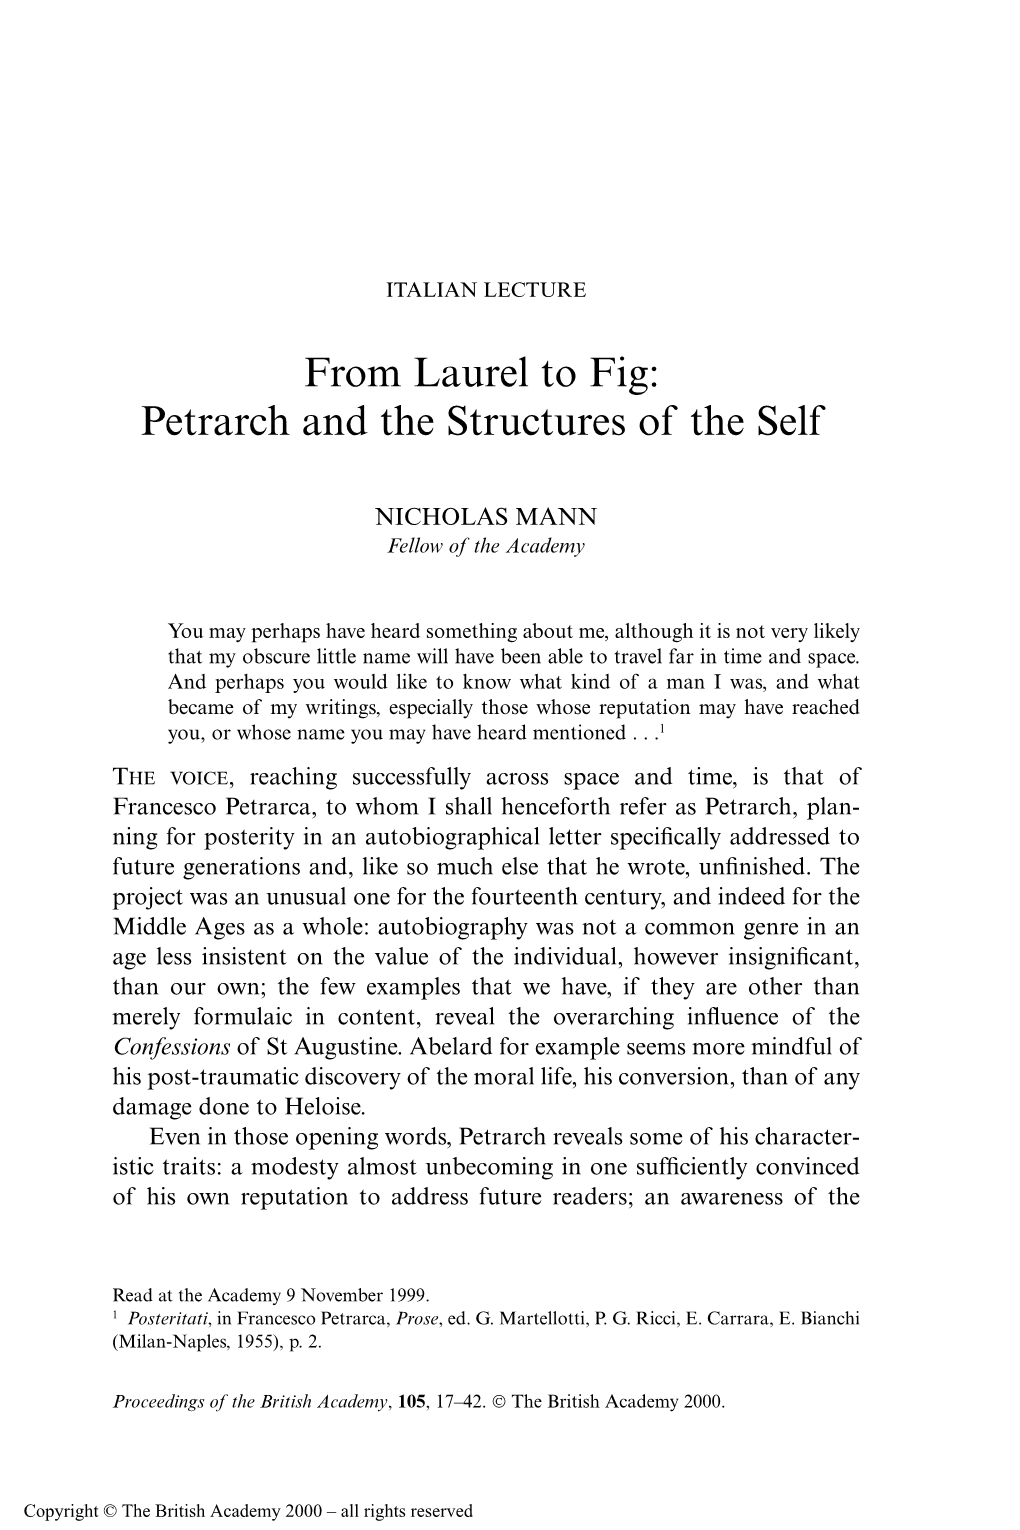 From Laurel to Fig: Petrarch and the Structures of the Self